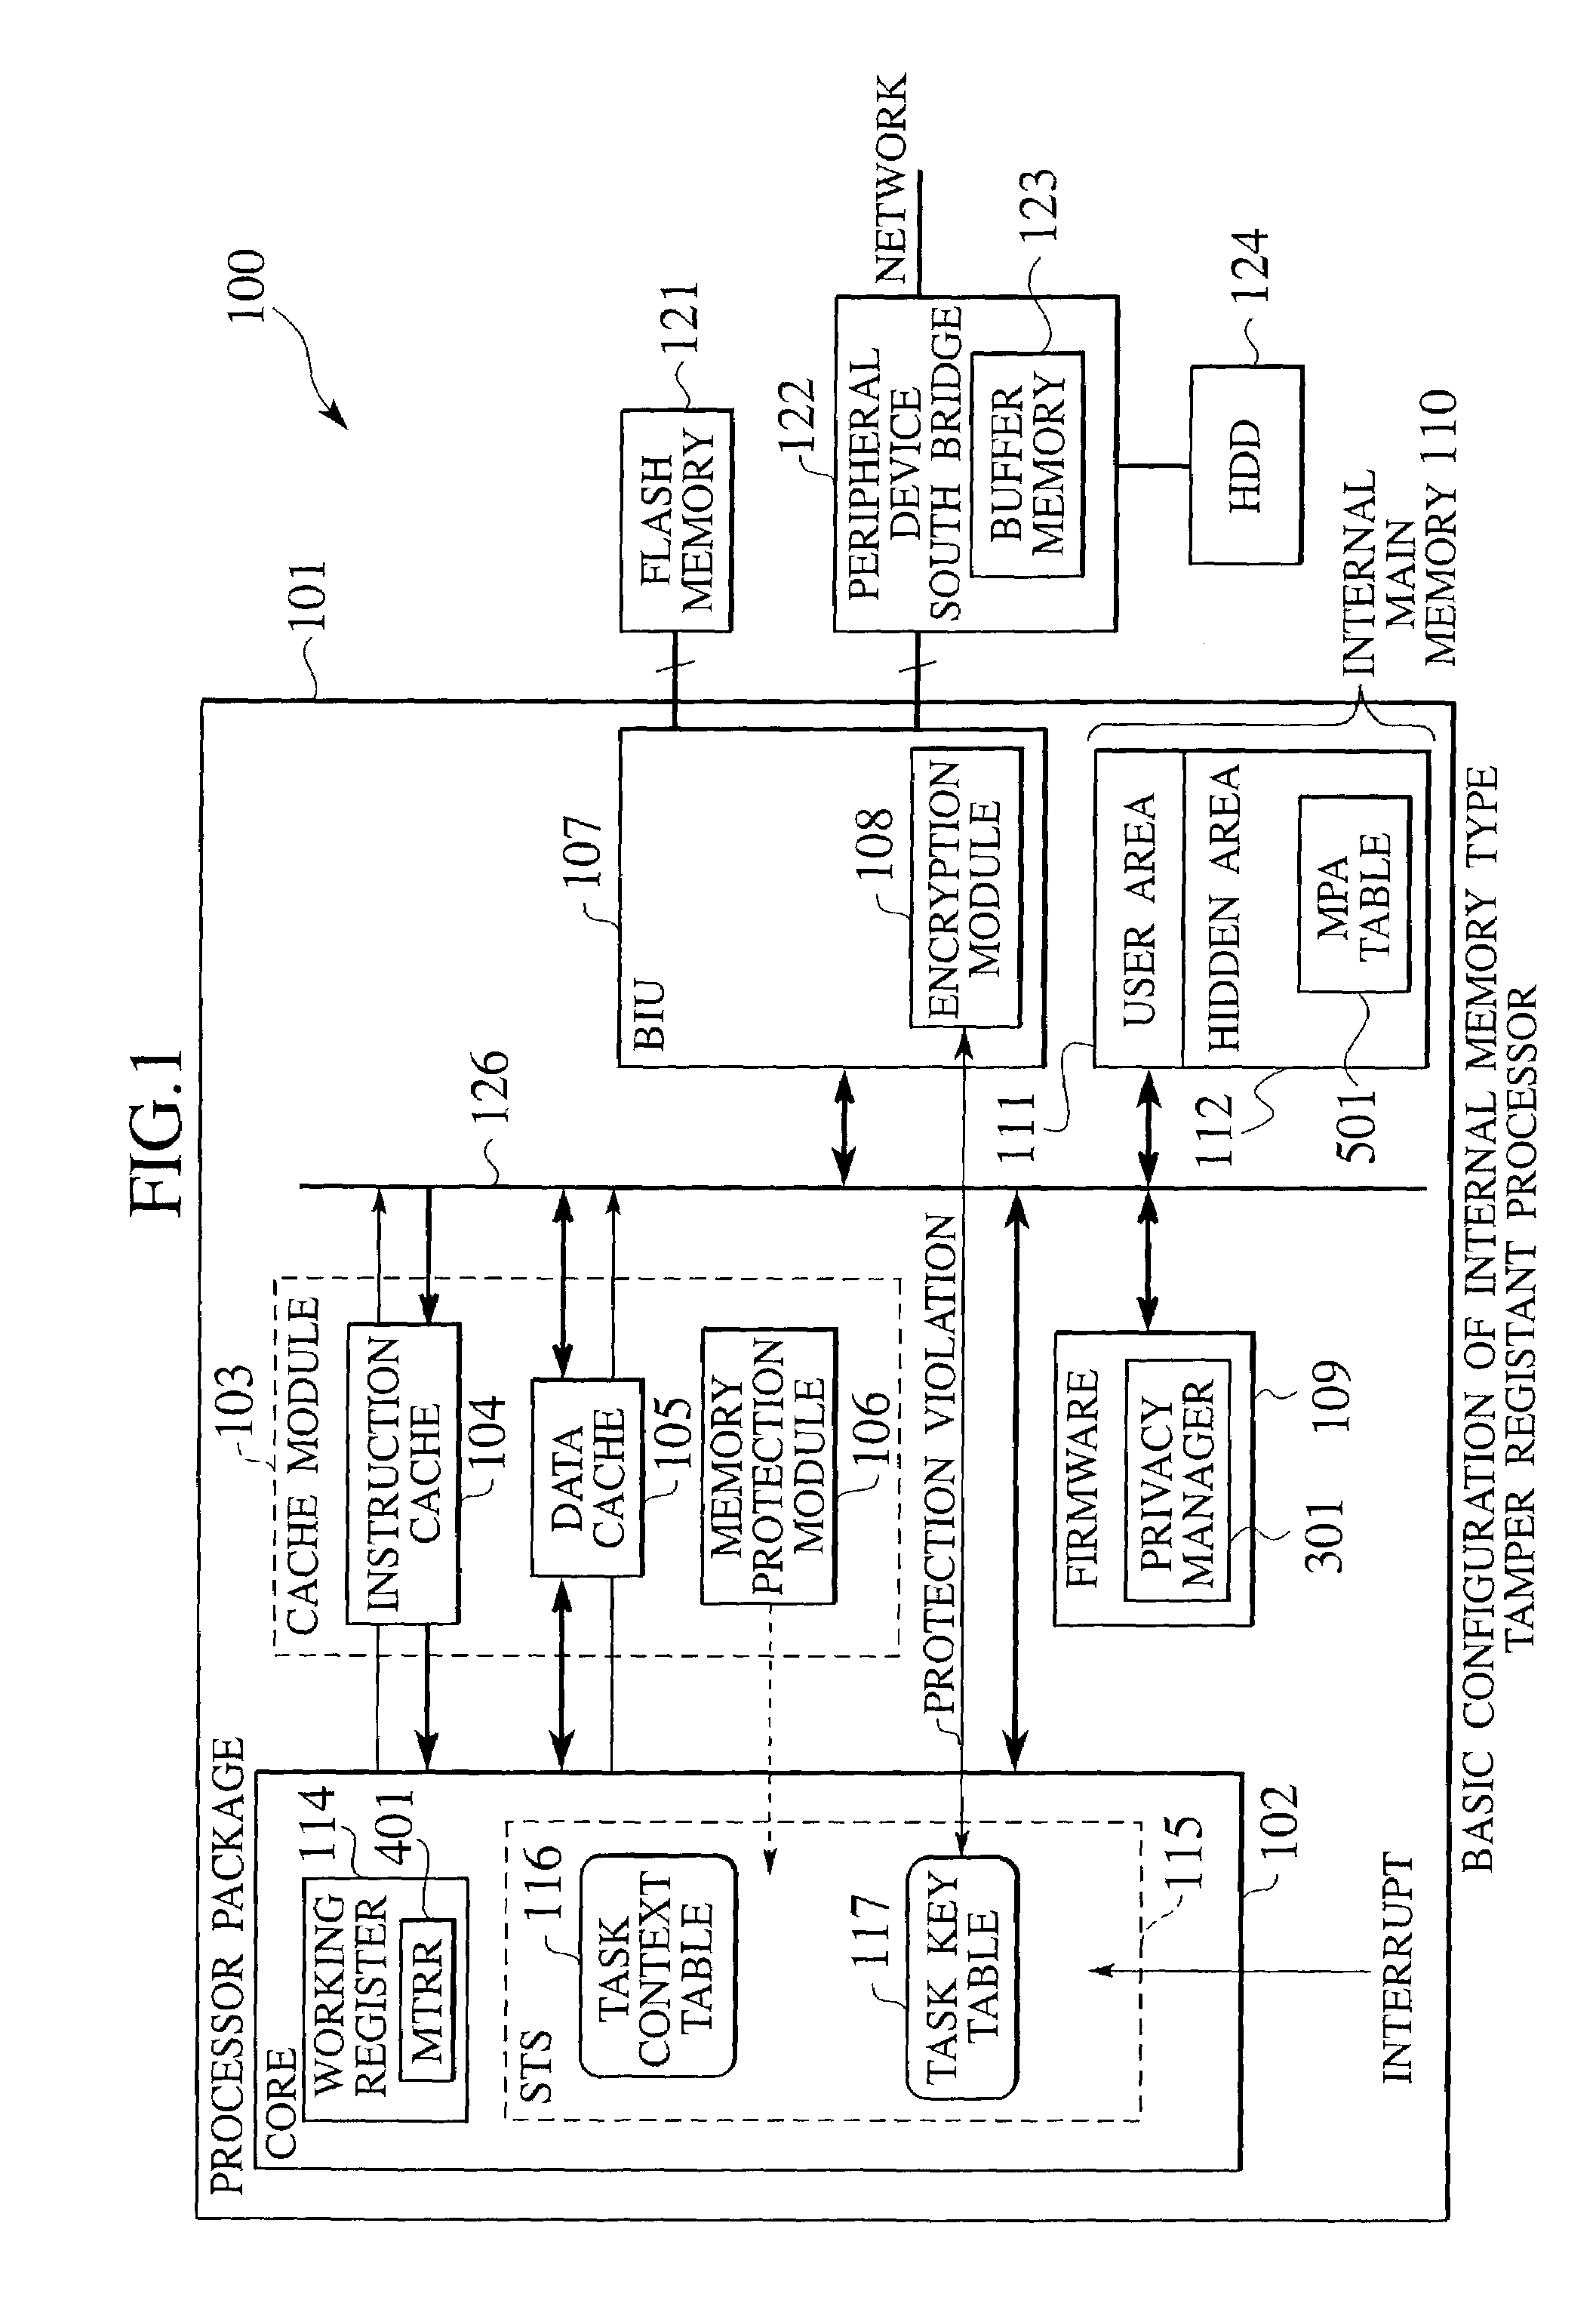 Internal memory type tamper resistant microprocessor with secret protection function